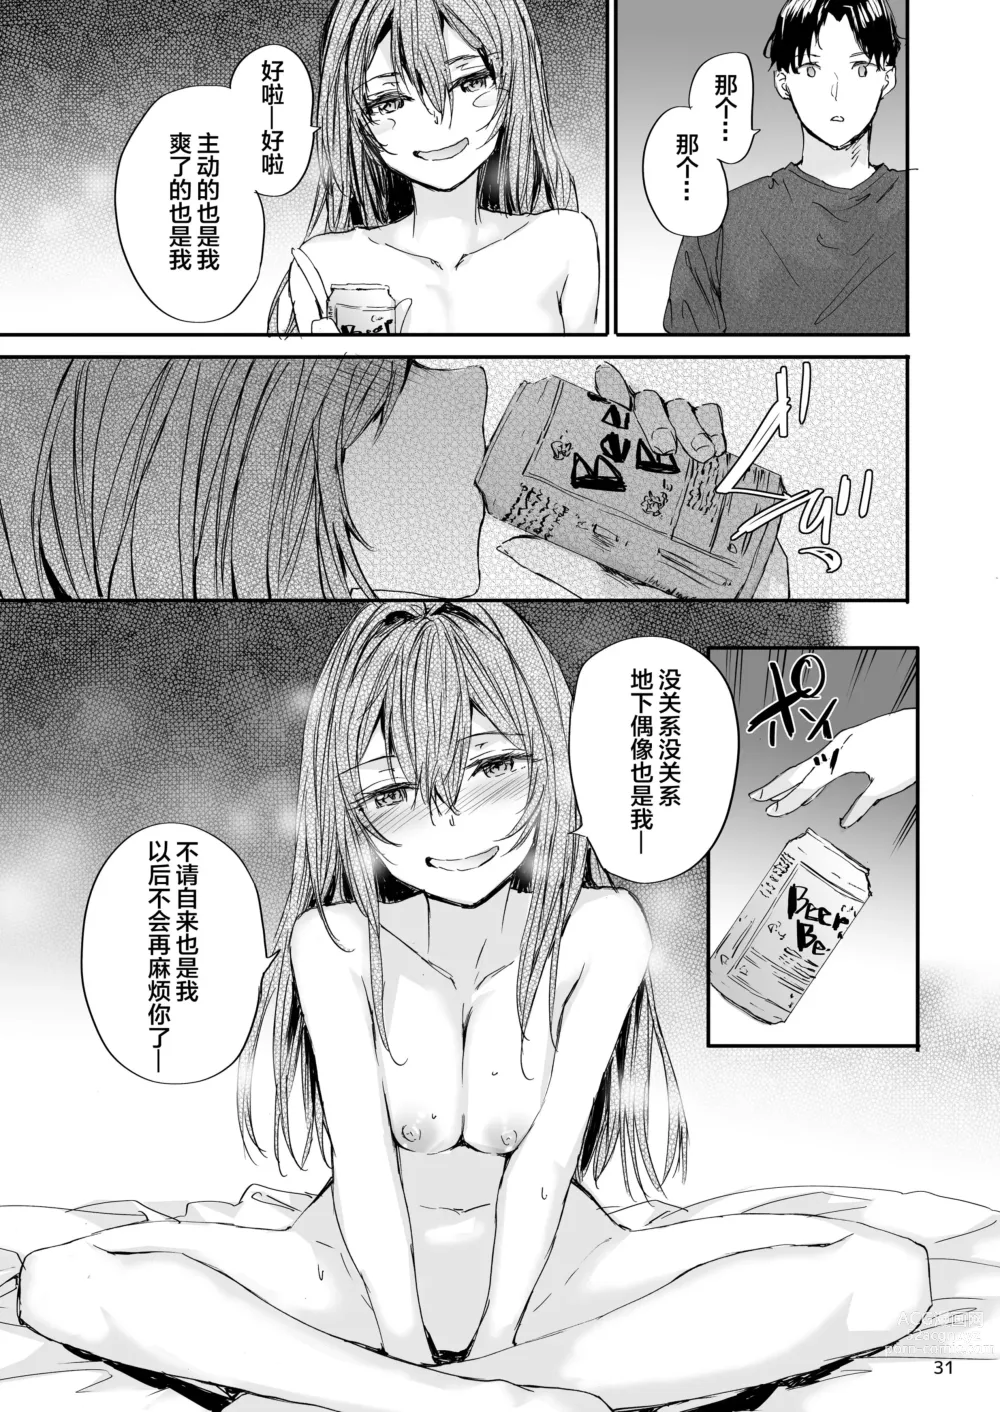 Page 32 of doujinshi Osagari Sex Friend Another 2 - Pass The Sex Friend Another  Vol. 2